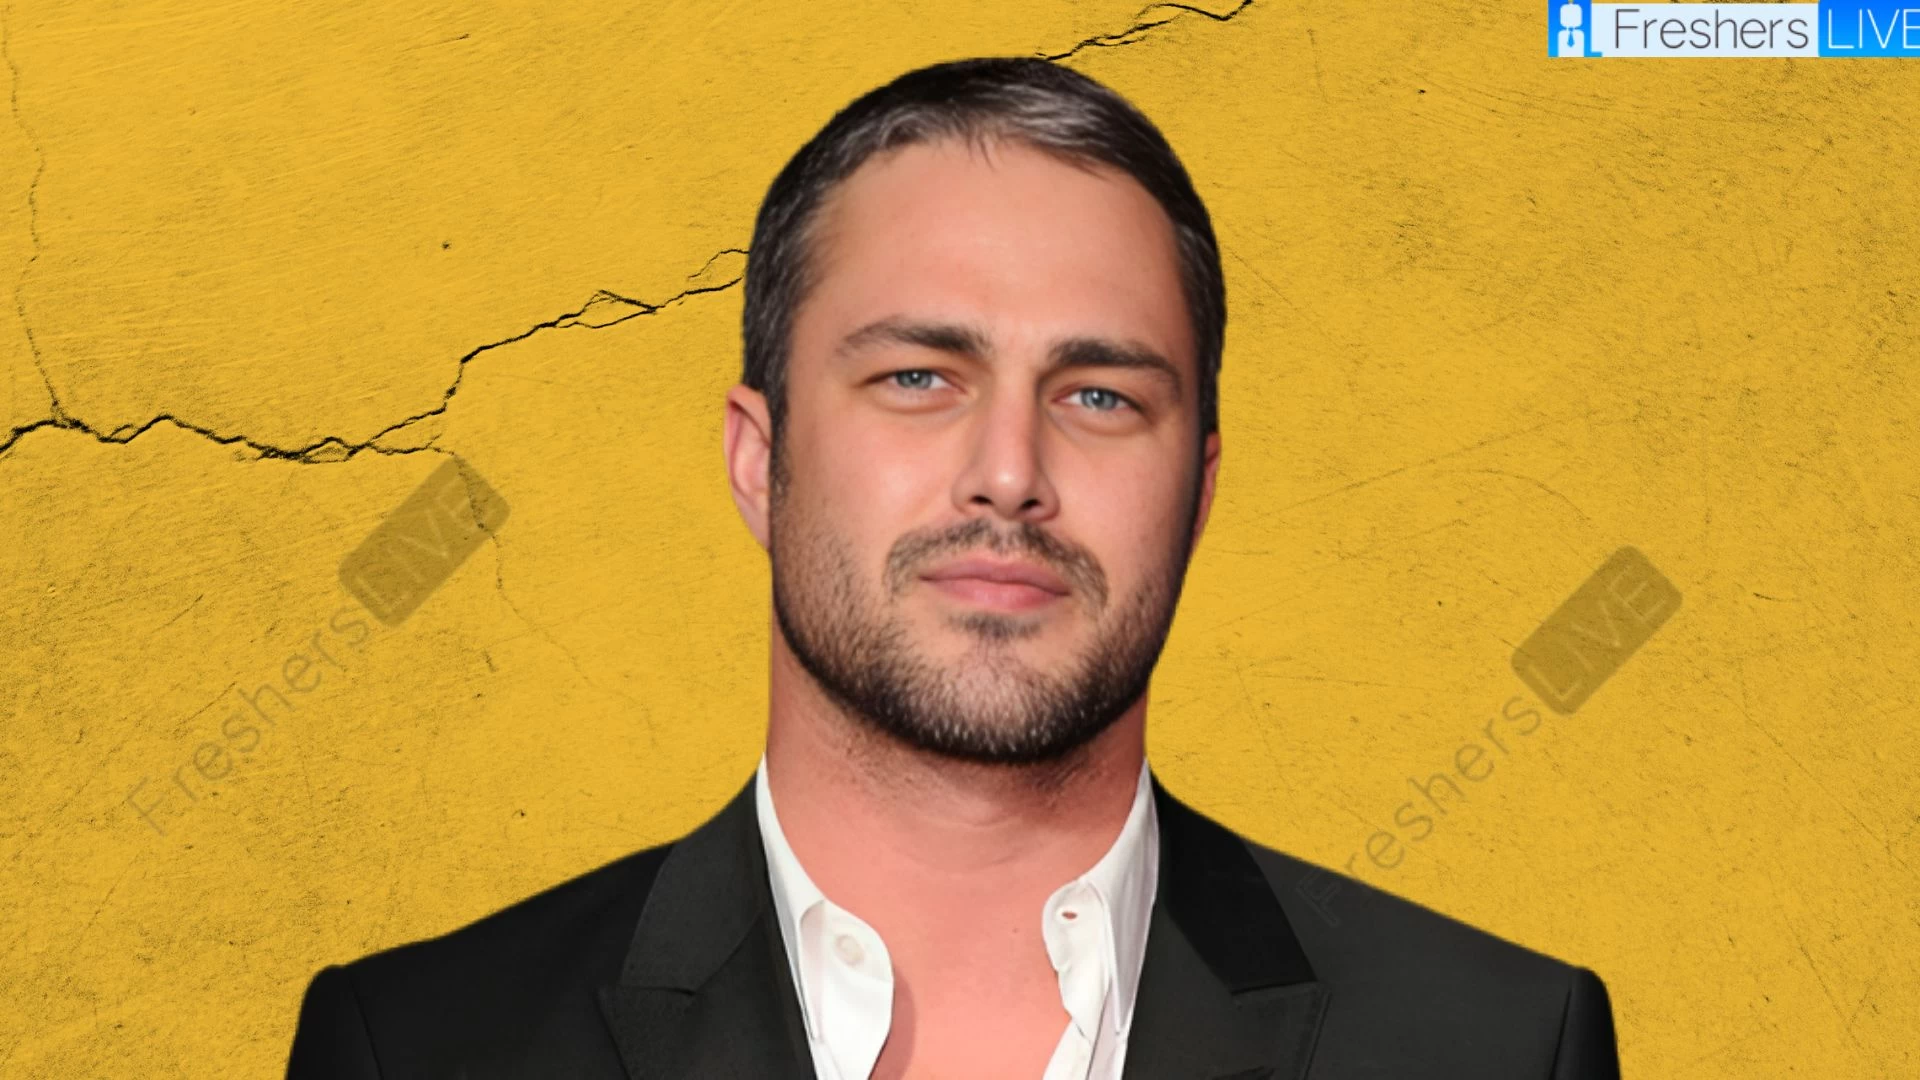 Taylor Kinney Ethnicity, What is Taylor Kinney's Ethnicity?